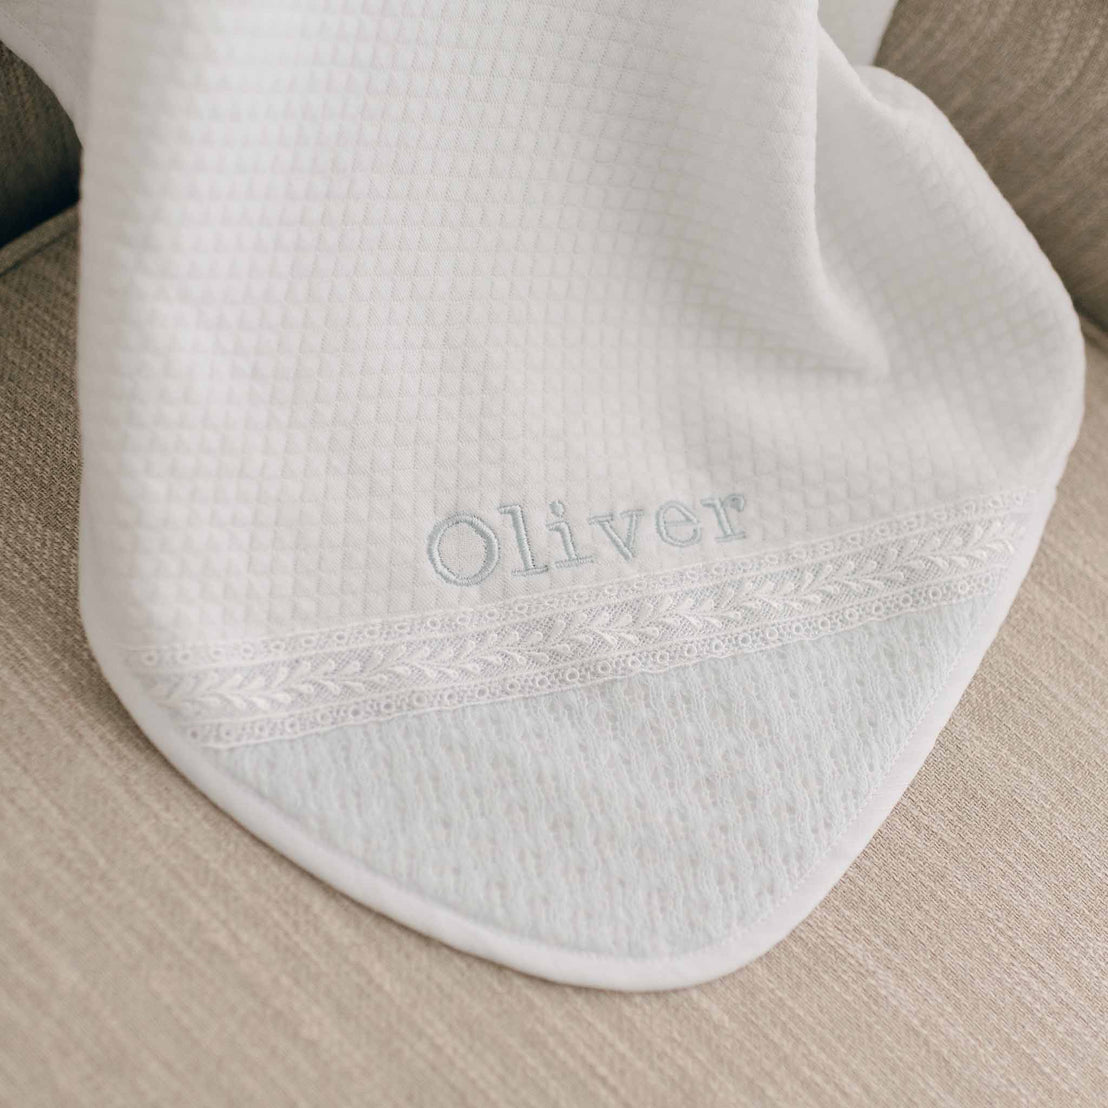 A close up of the white Oliver Personalized Blanket draped over a beige couch. The bottom edge of this personalized heirloom features delicate lace detailing and is embroidered with the name "Oliver" in light blue thread.